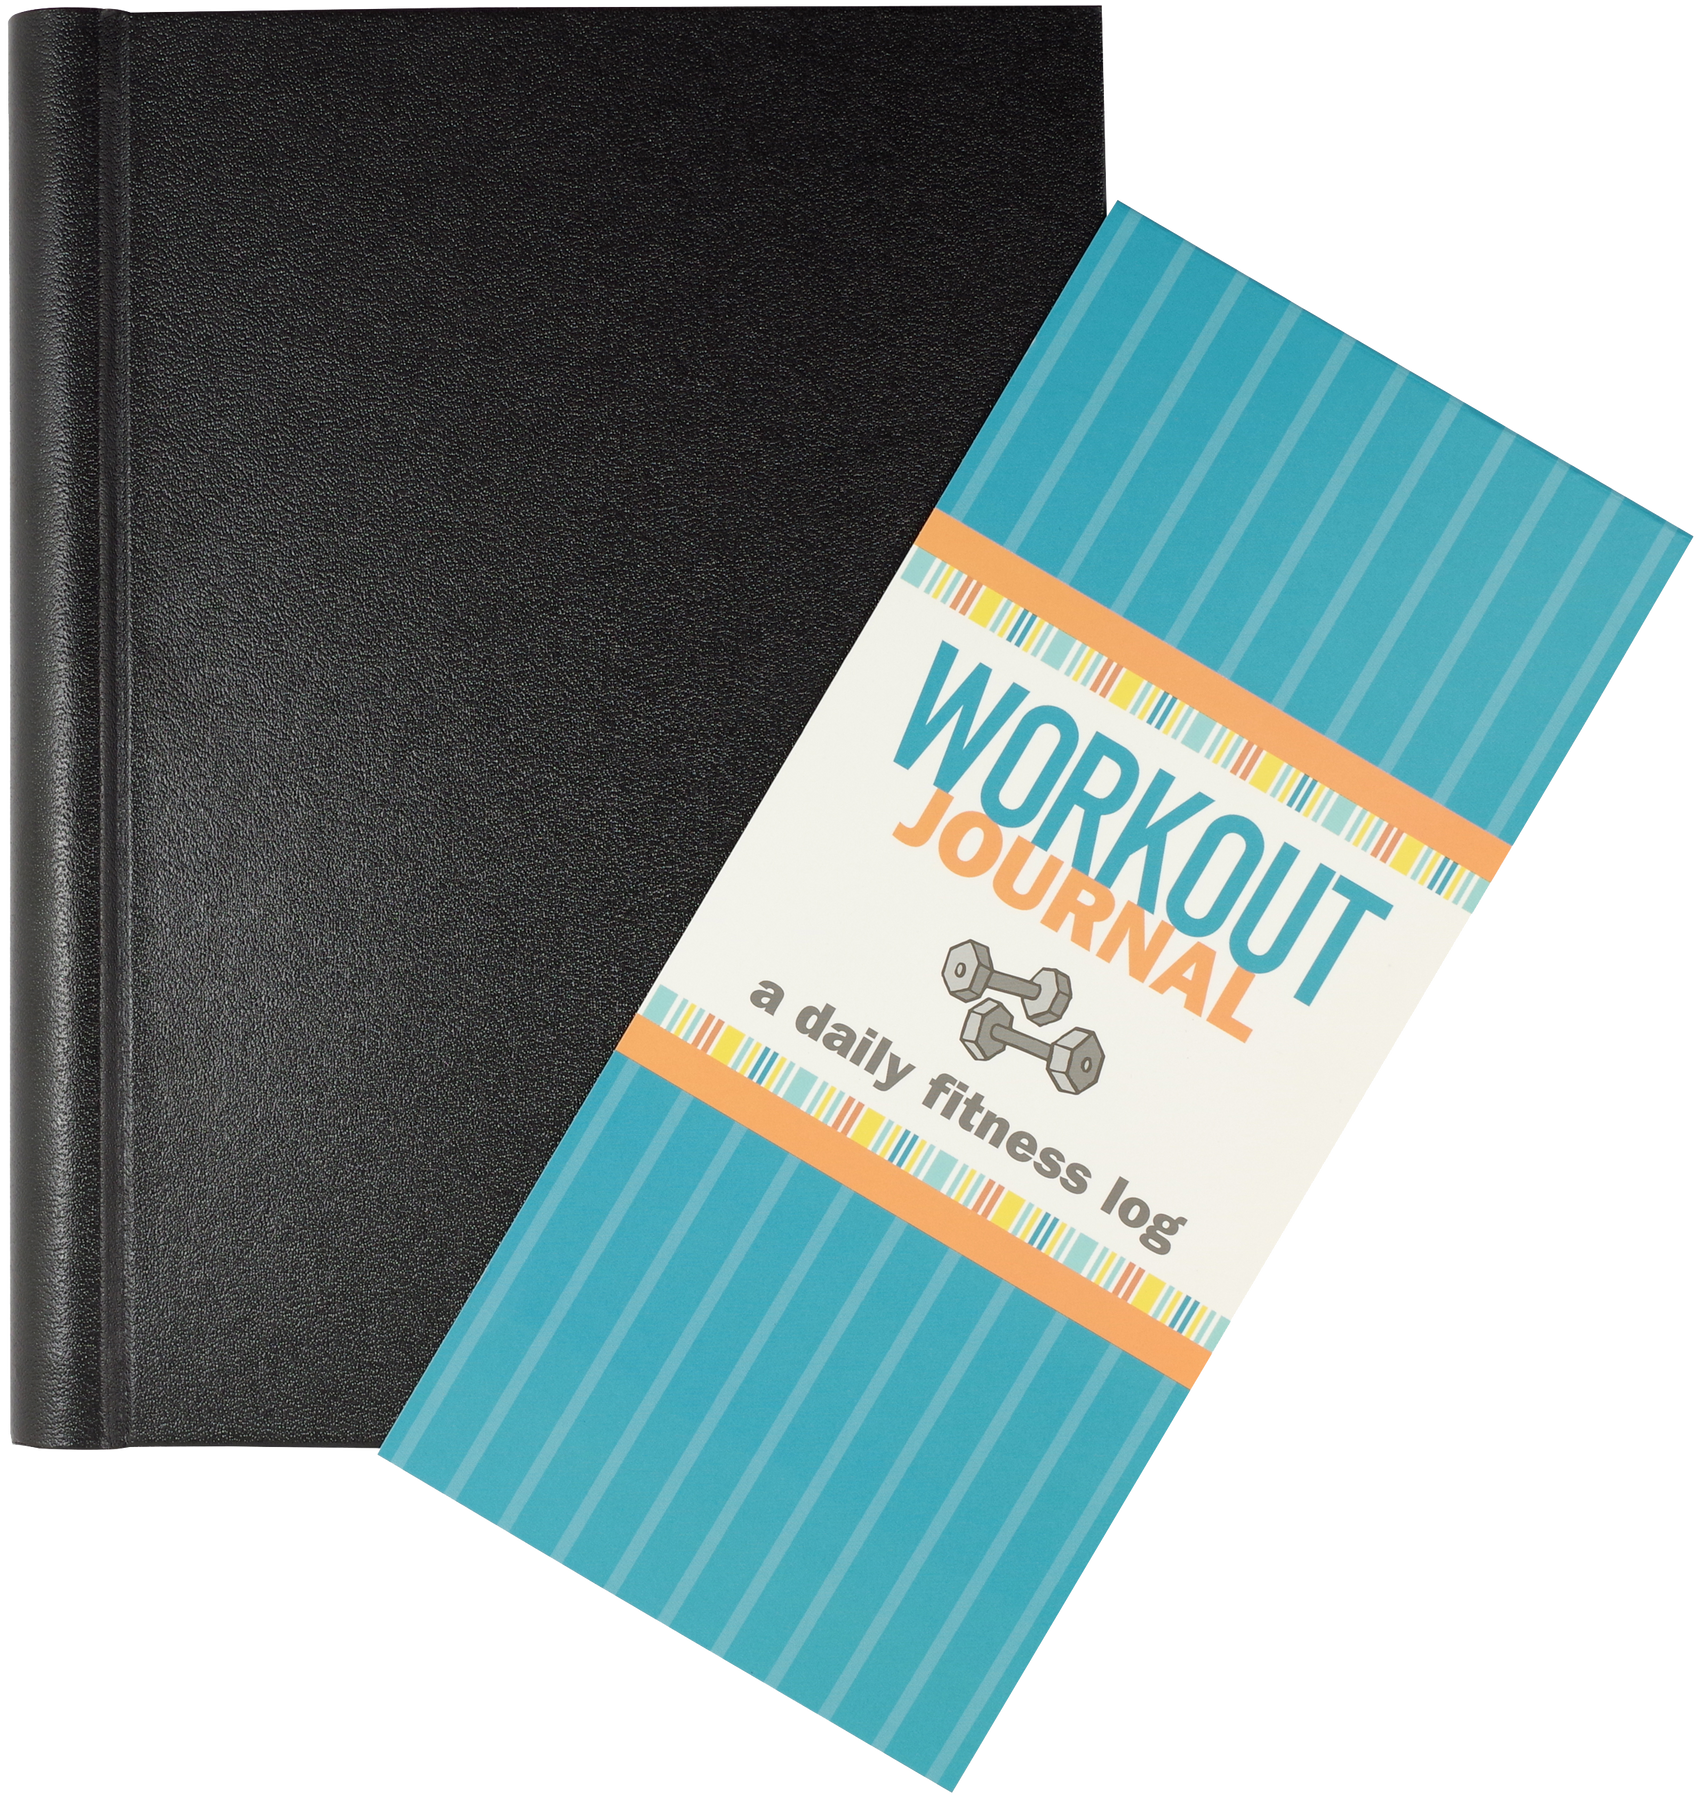 Workout Journal: A Daily Fitness Log (Revised, 2nd Edition